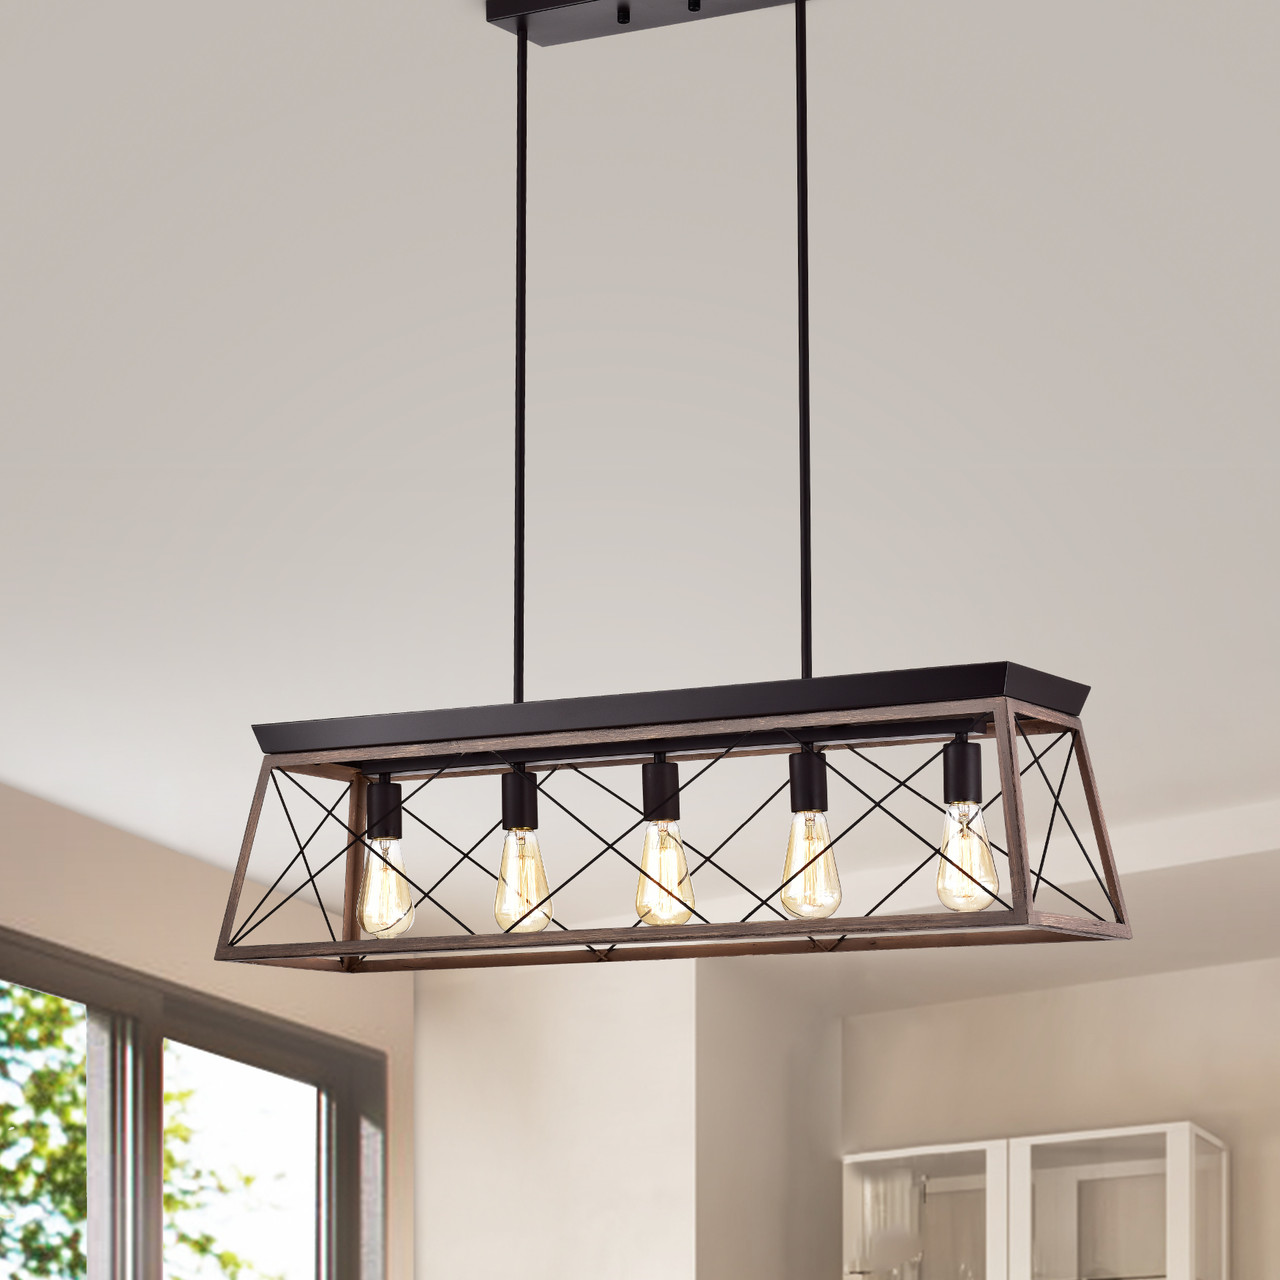 WAREHOUSE OF TIFFANY'S PD003-5IWG Harry 38 in. 5-LightIndoor Oil Rubbed Bronze Finish Chandelier with Light Kit